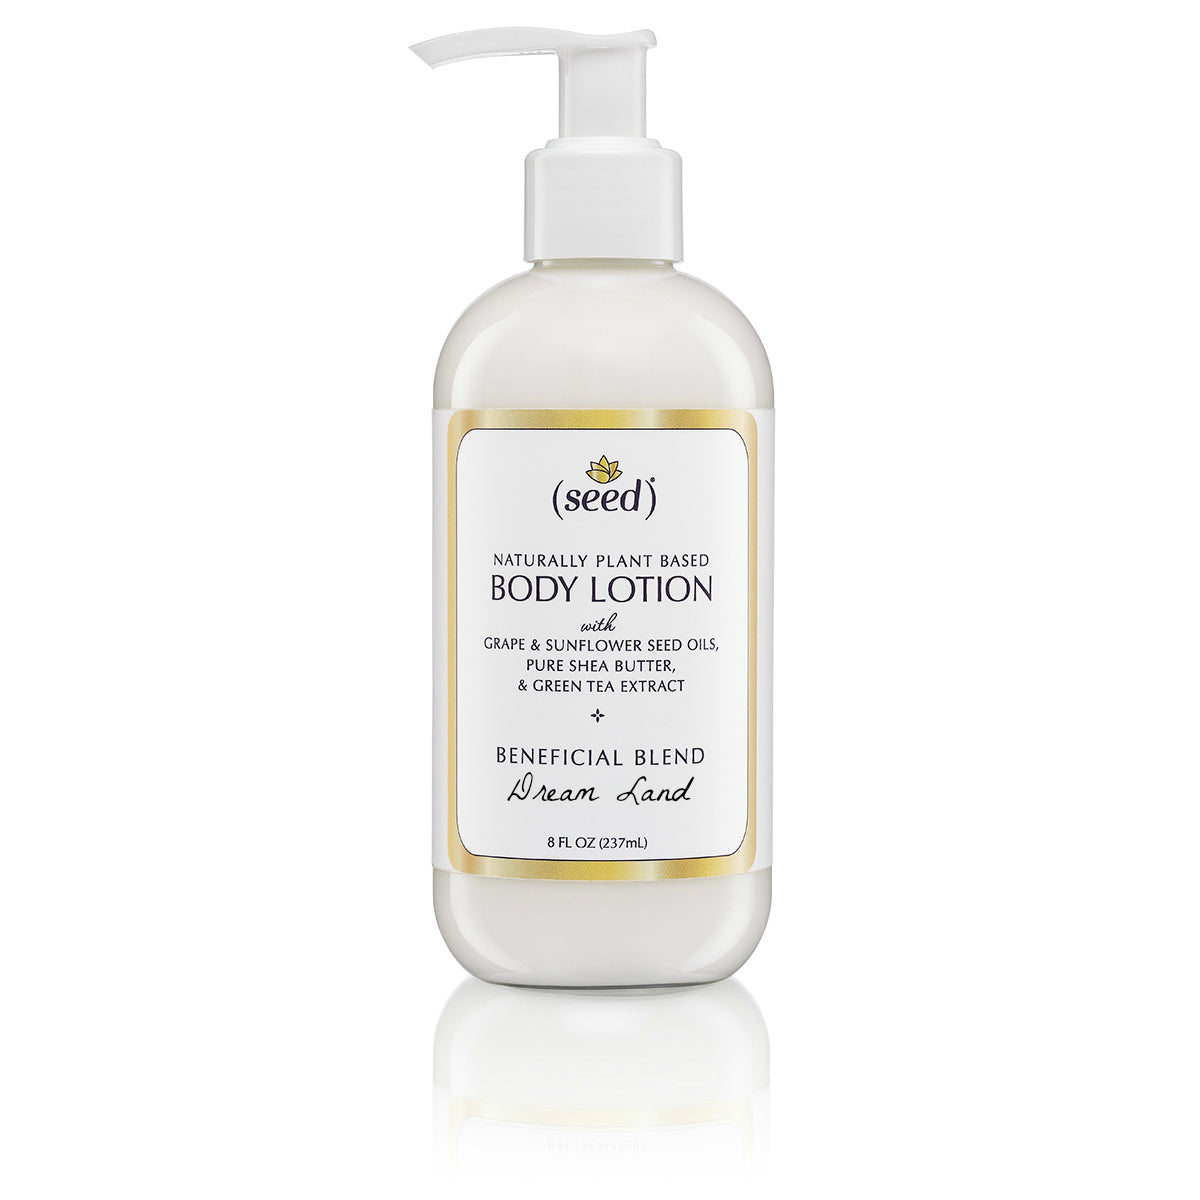 Seed Dream Land Blend Body Lotion 8 oz with lavender, lemon, and ginger essential oils